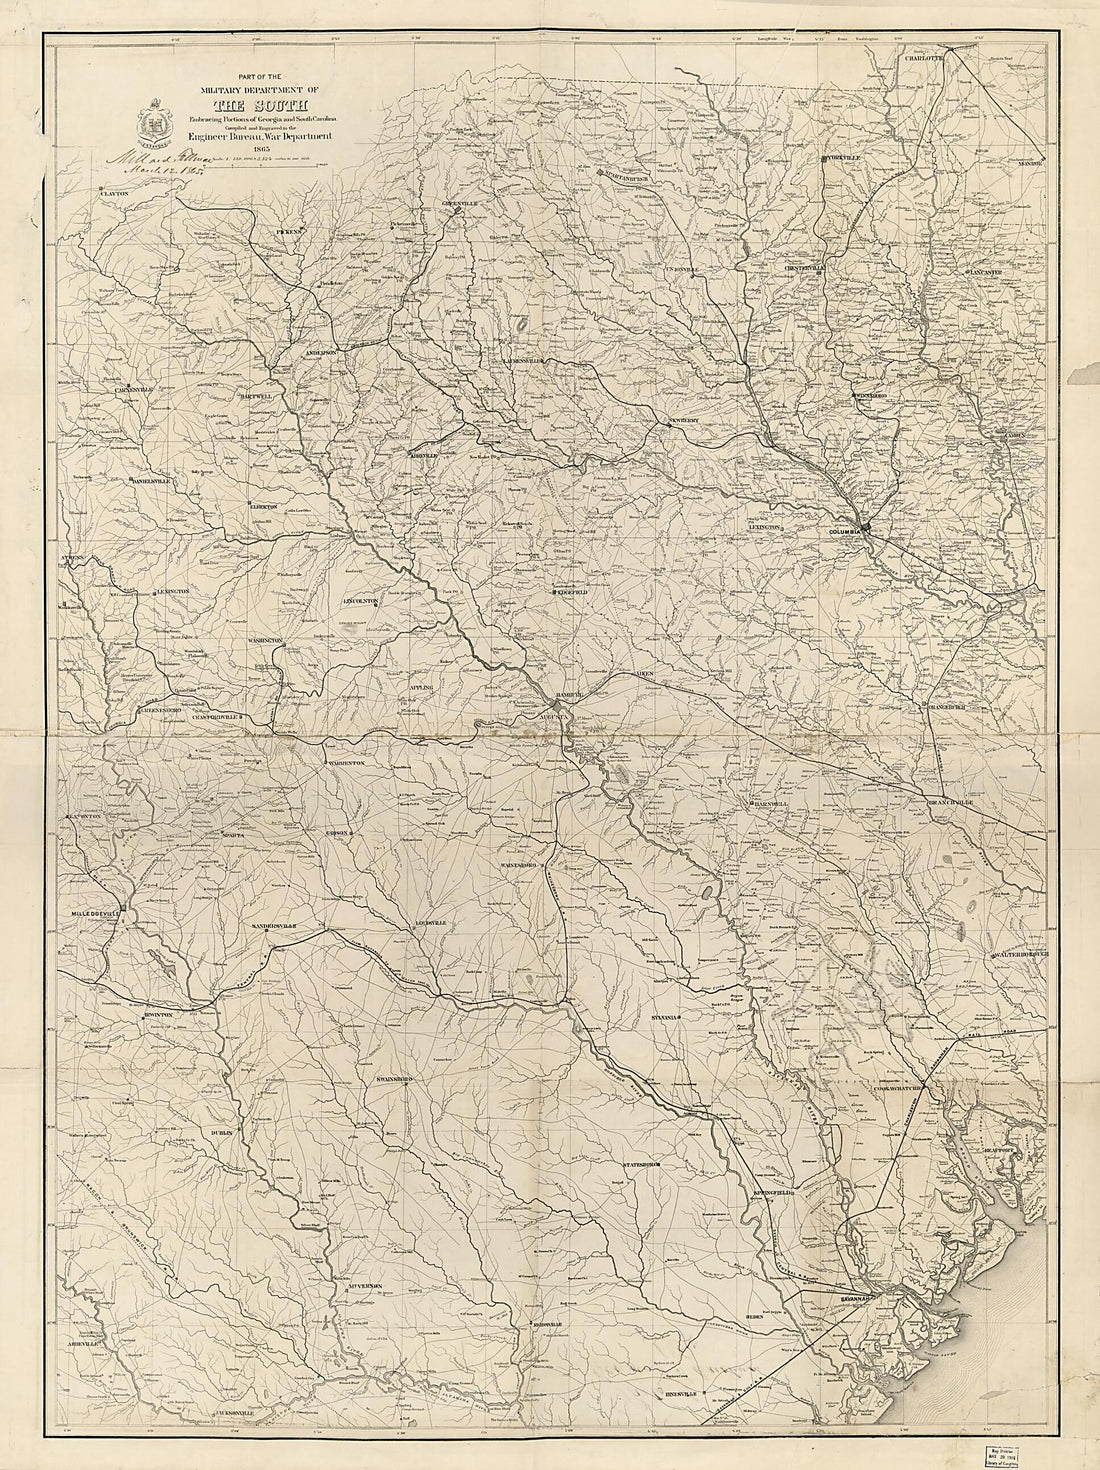 This old map of Part of the Military Department of the South, Embracing Portions of Georgia and South Carolina, and Part of the Military Department of North Carolina from 1865 was created by Millard Fillmore,  United States. Army. Corps of Engineers in 1